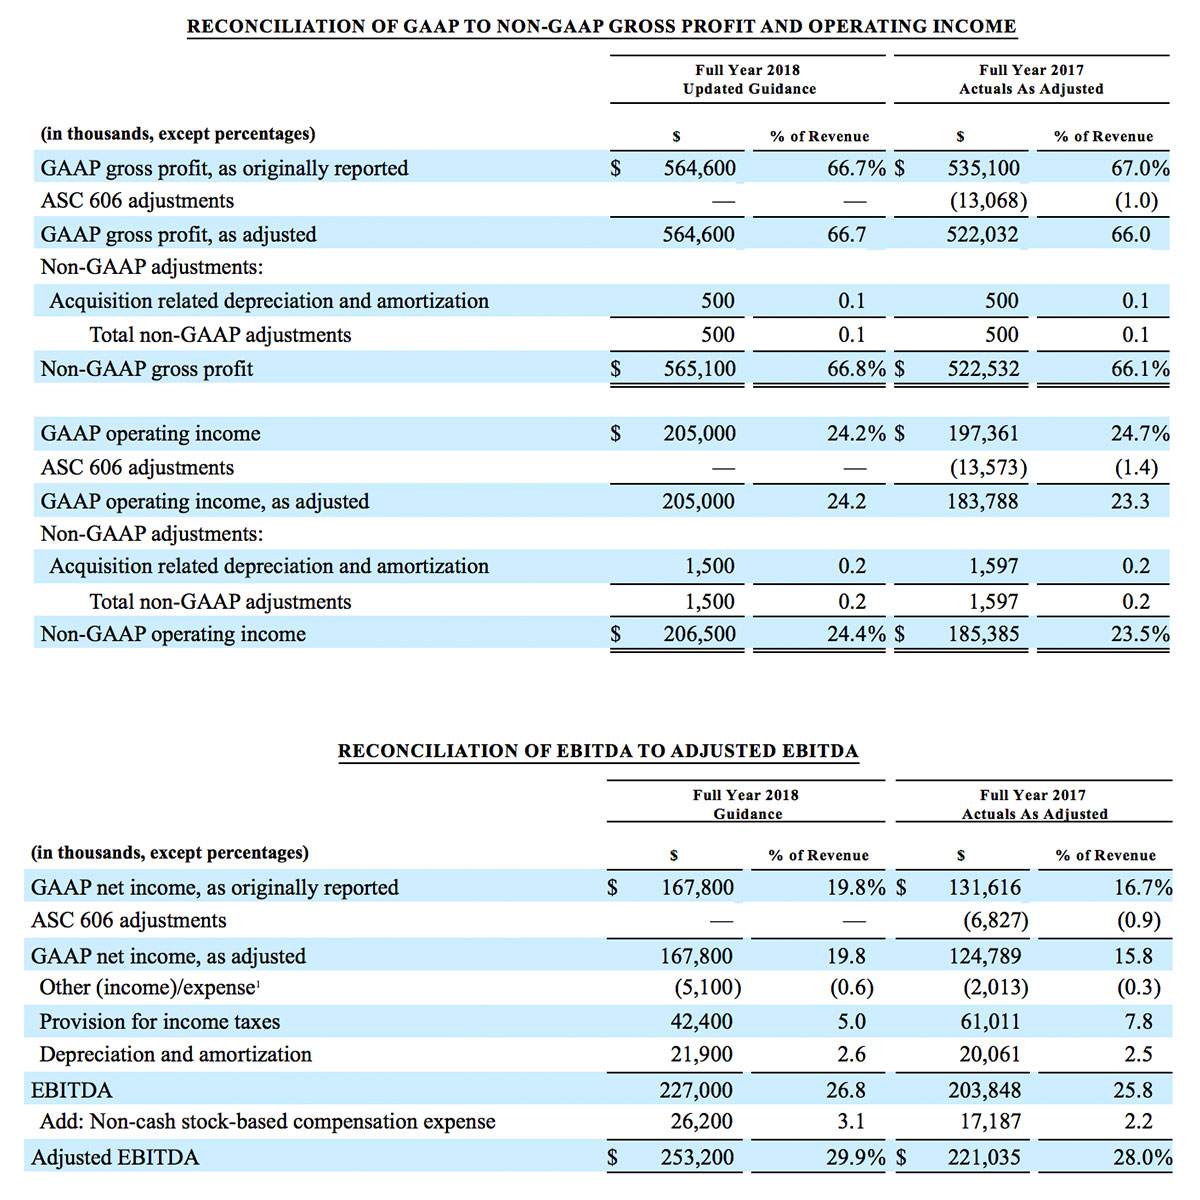 Reconciliation of gaap to non-gaap gross profit 